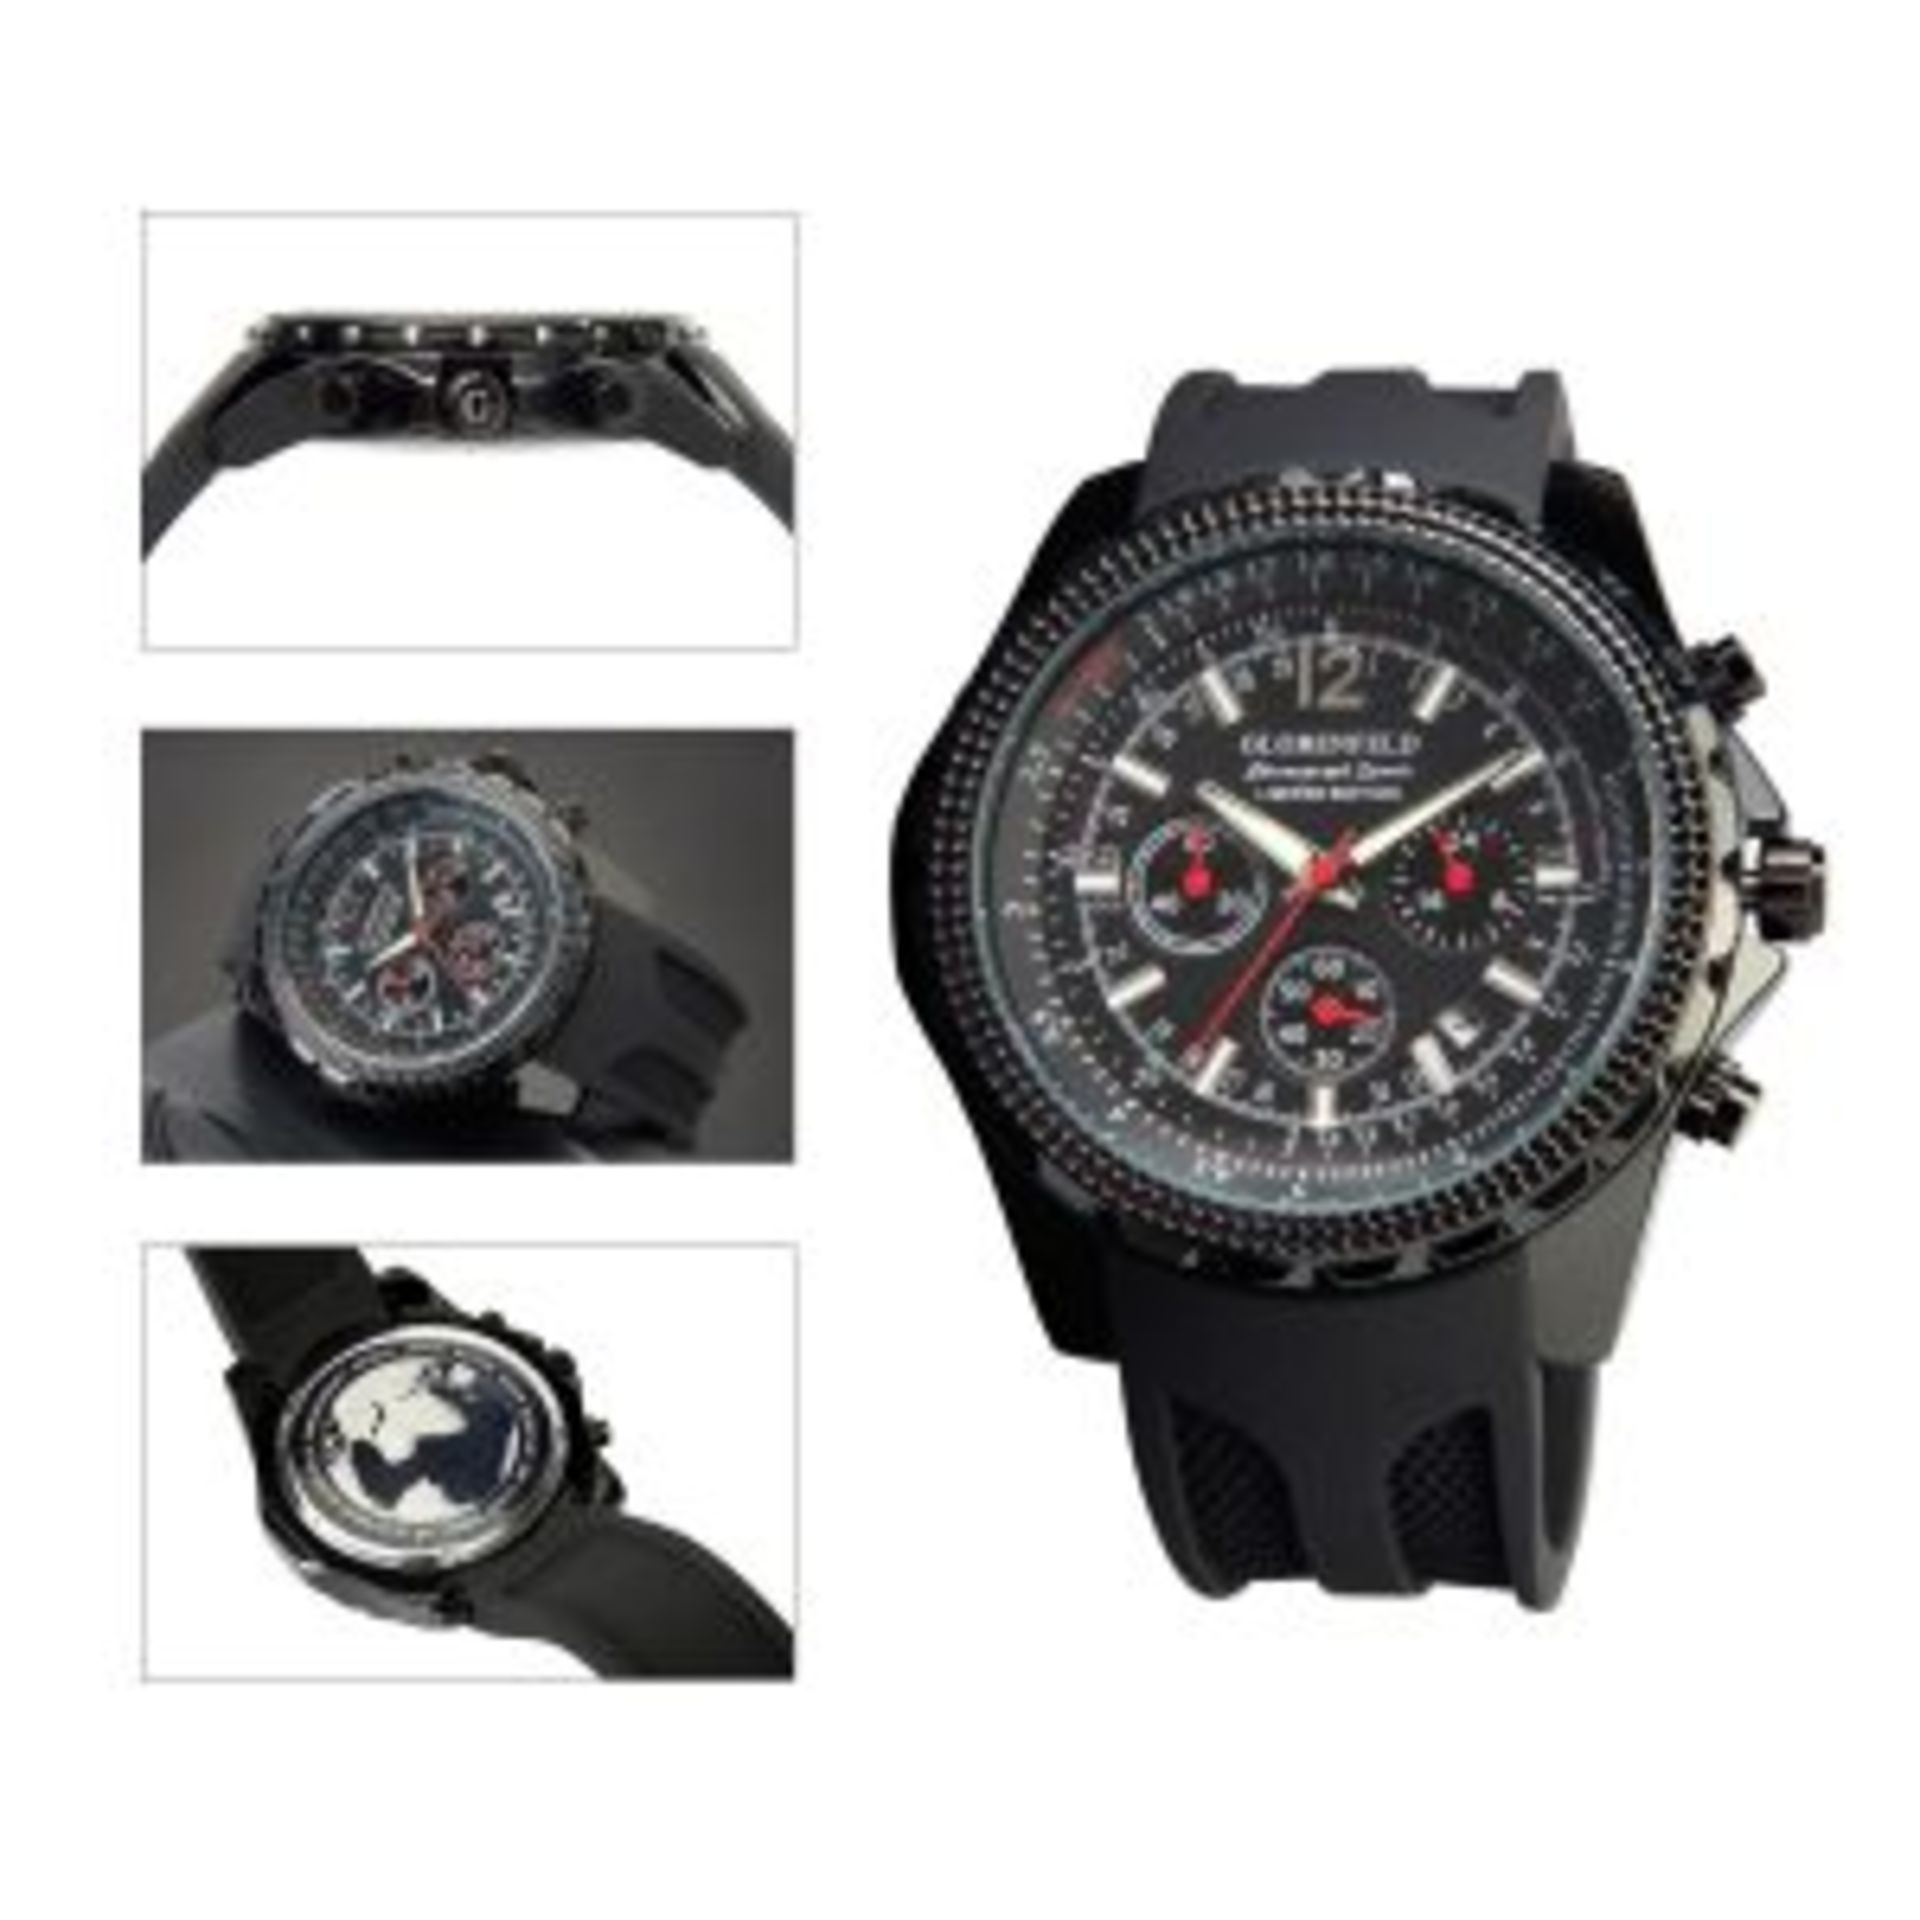 + VAT Brand New Gents Globenfeld Limited Edition Chronograph Sports Watch with Full Chronograph